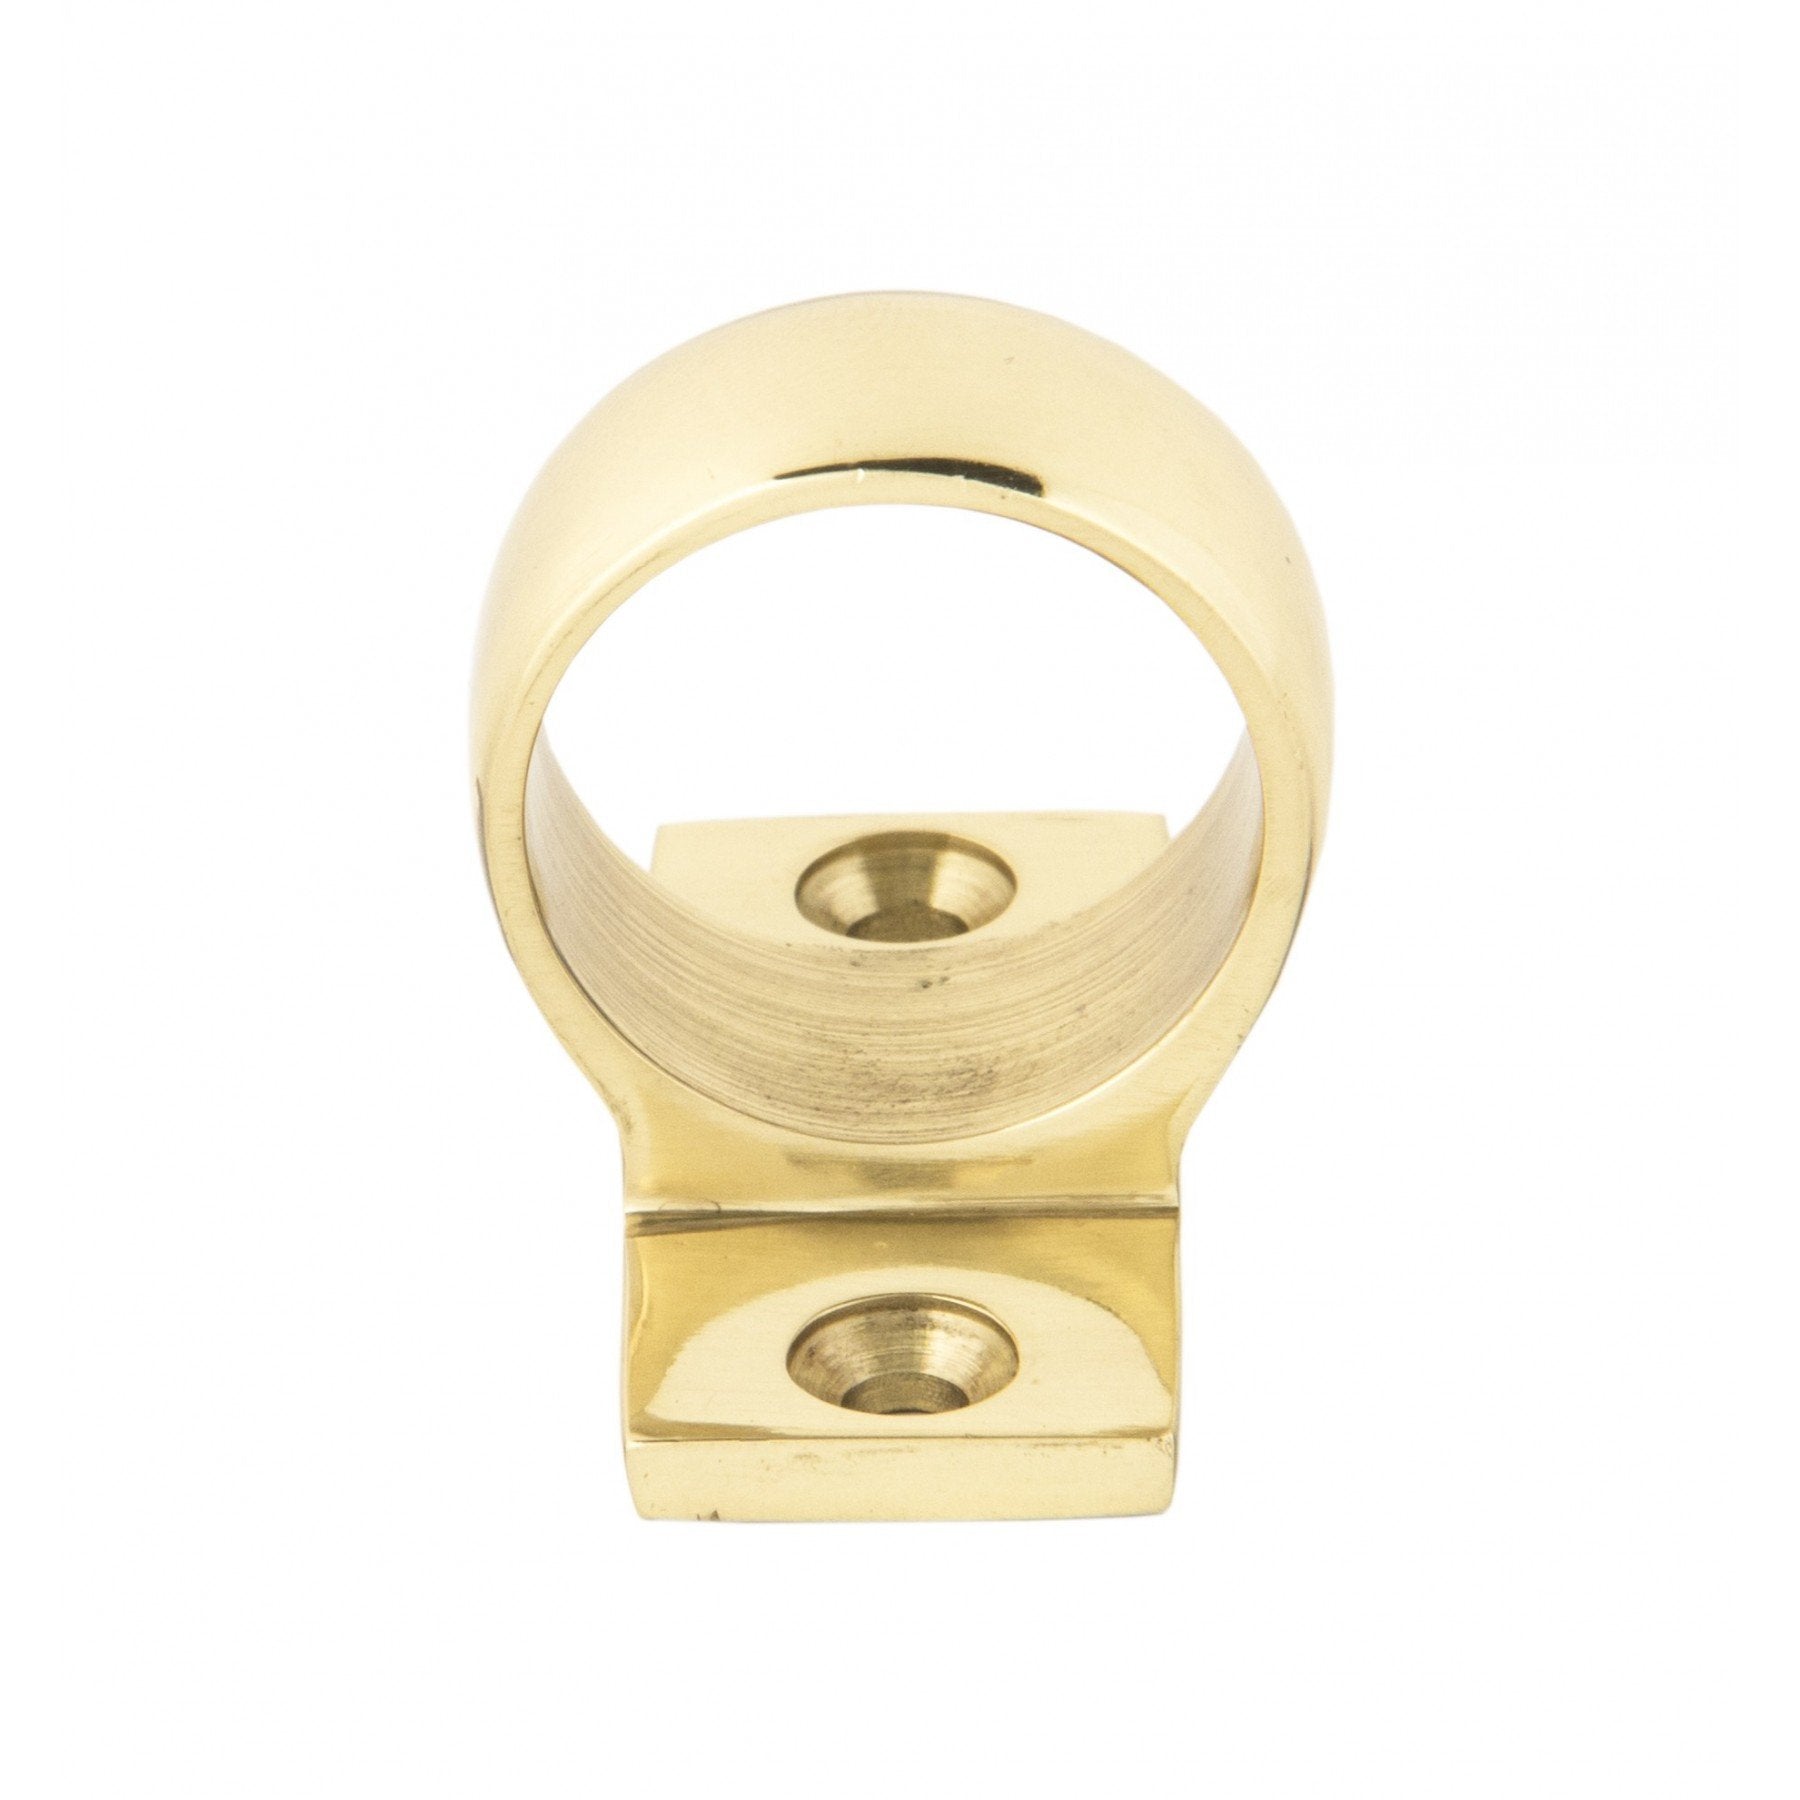 From the Anvil Polished Brass Sash Eye Lift